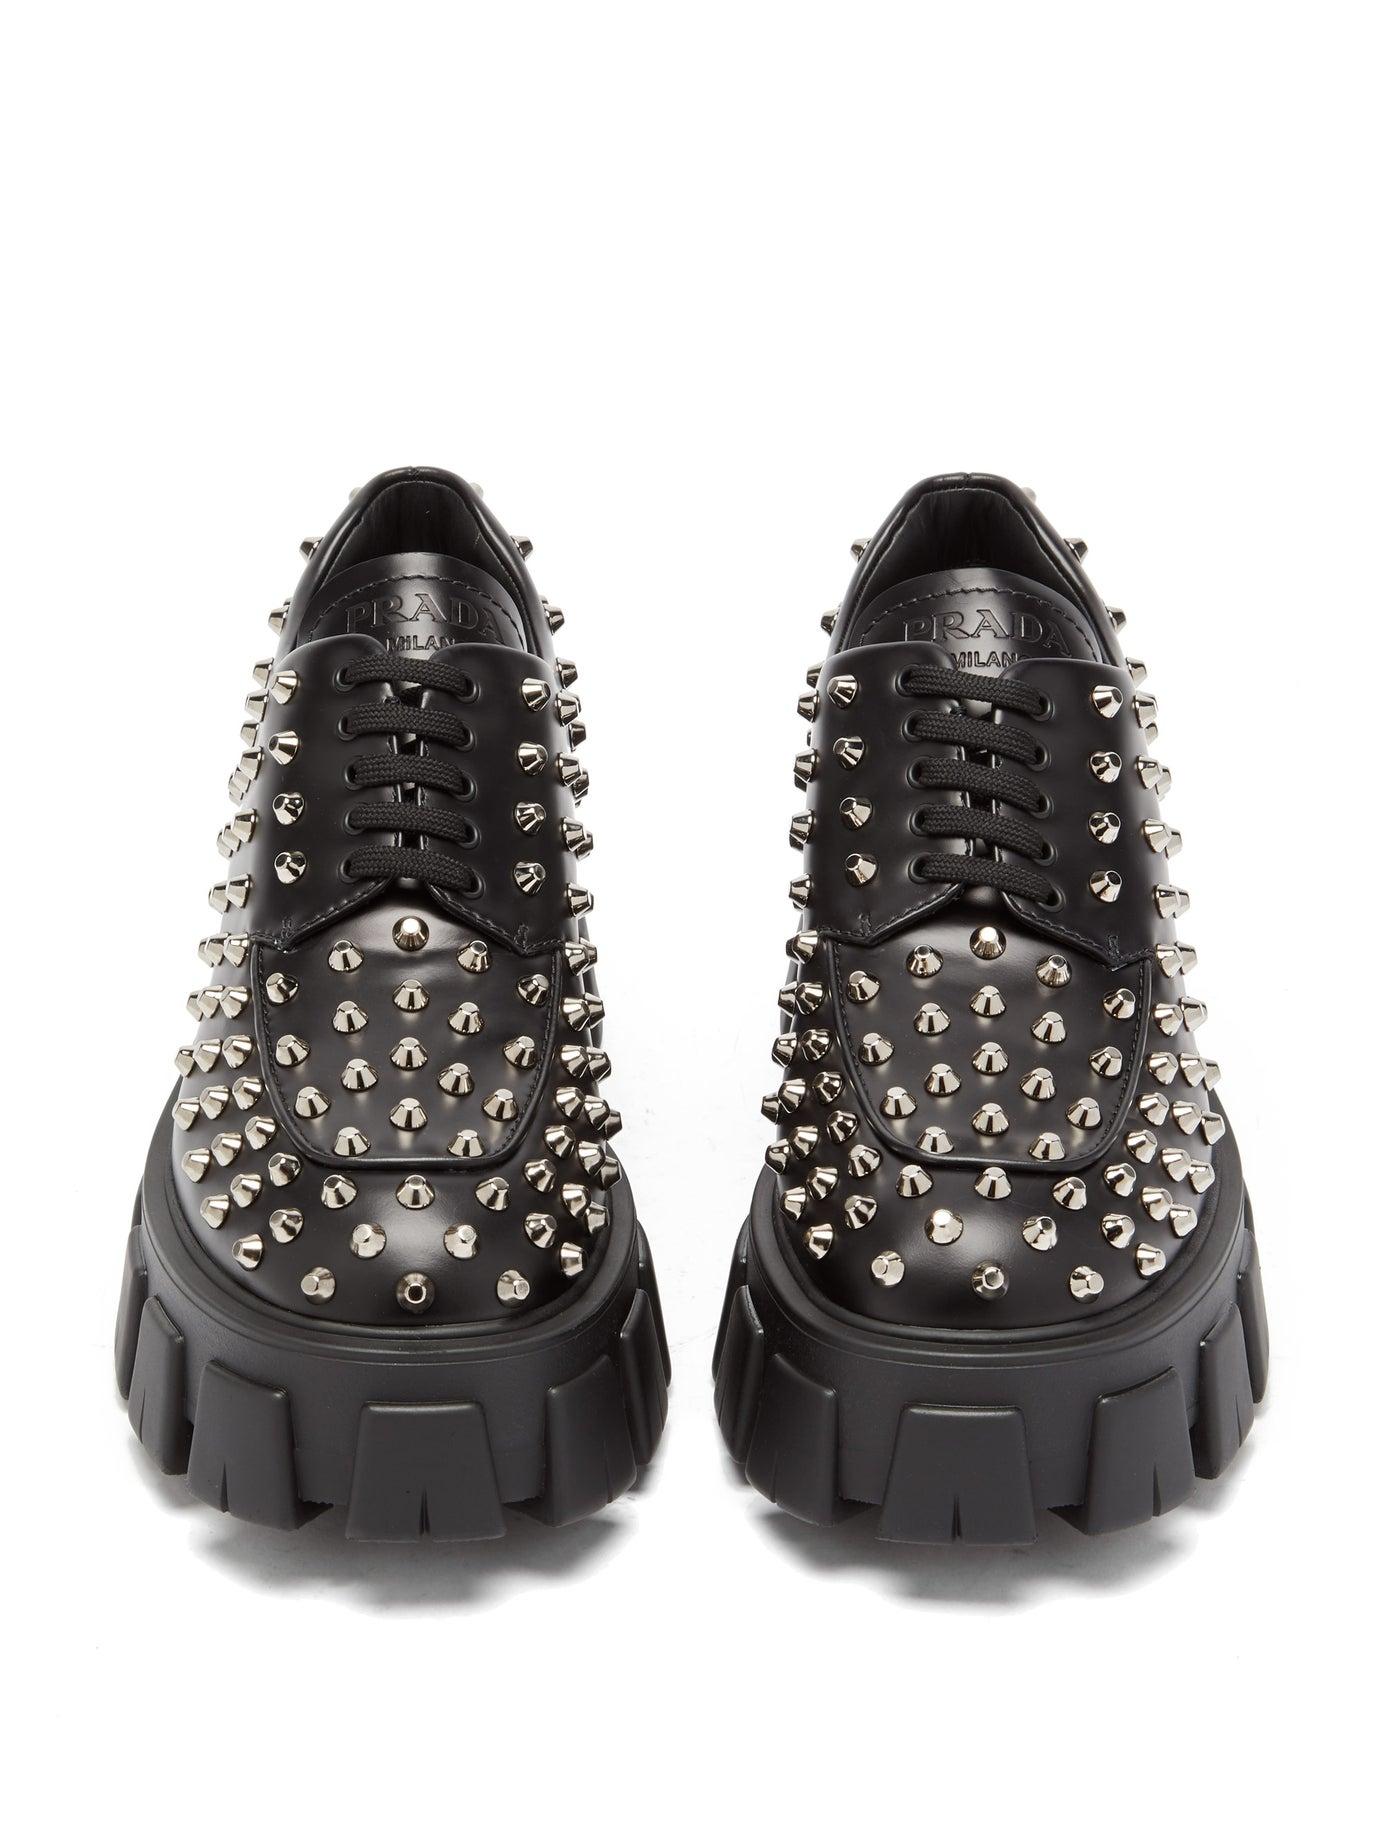 Prada Studded Leather Derby Shoes in Black | Lyst